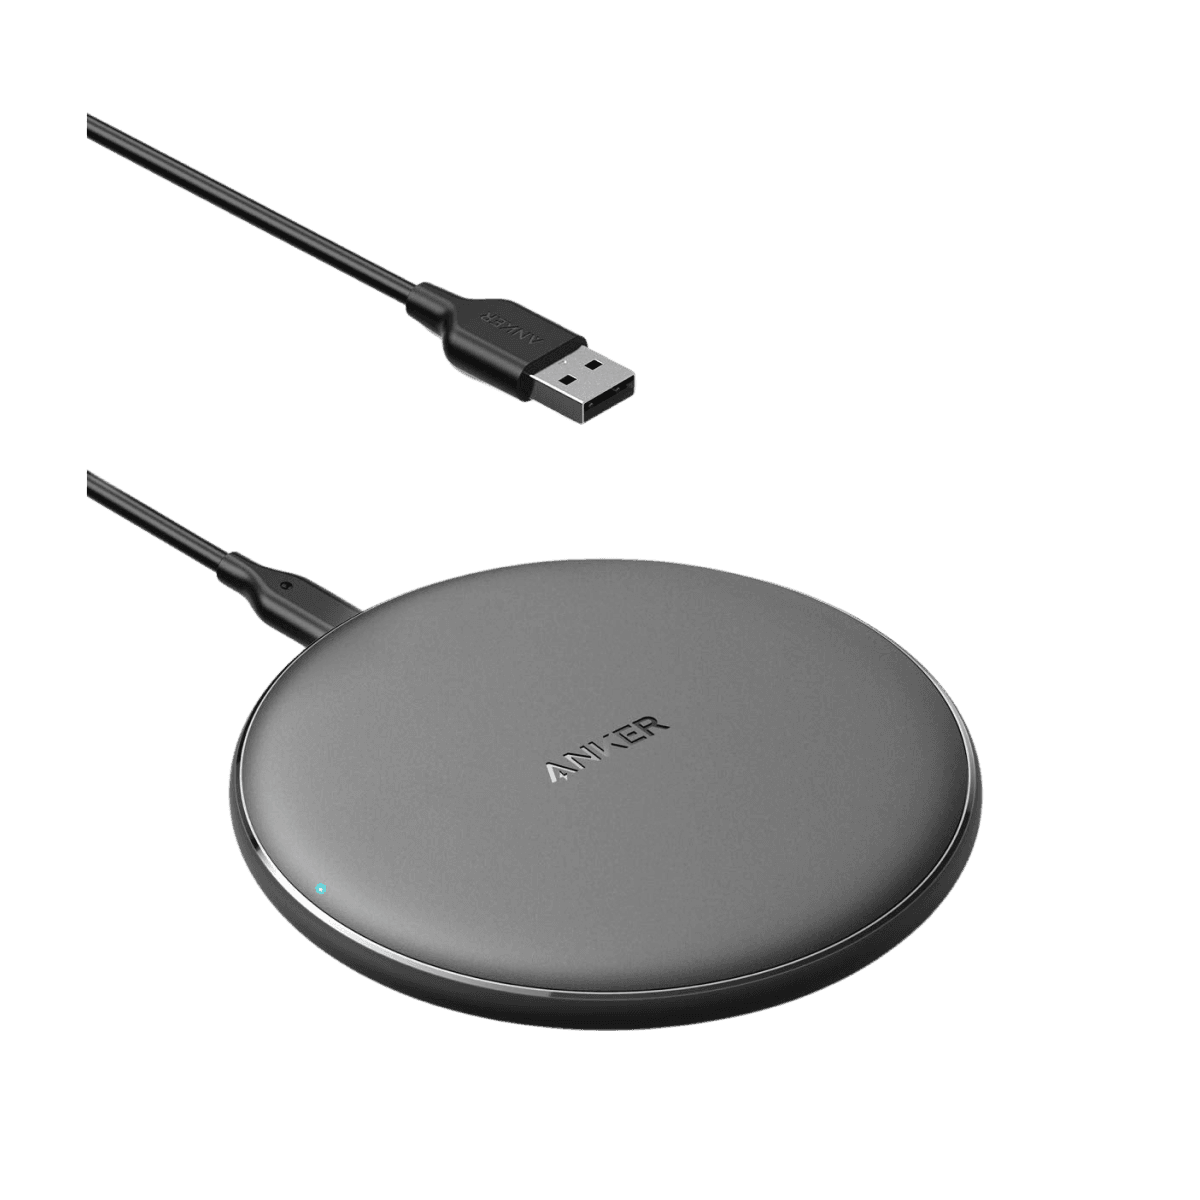 Anker <b>313</b> Wireless Charger (Pad)